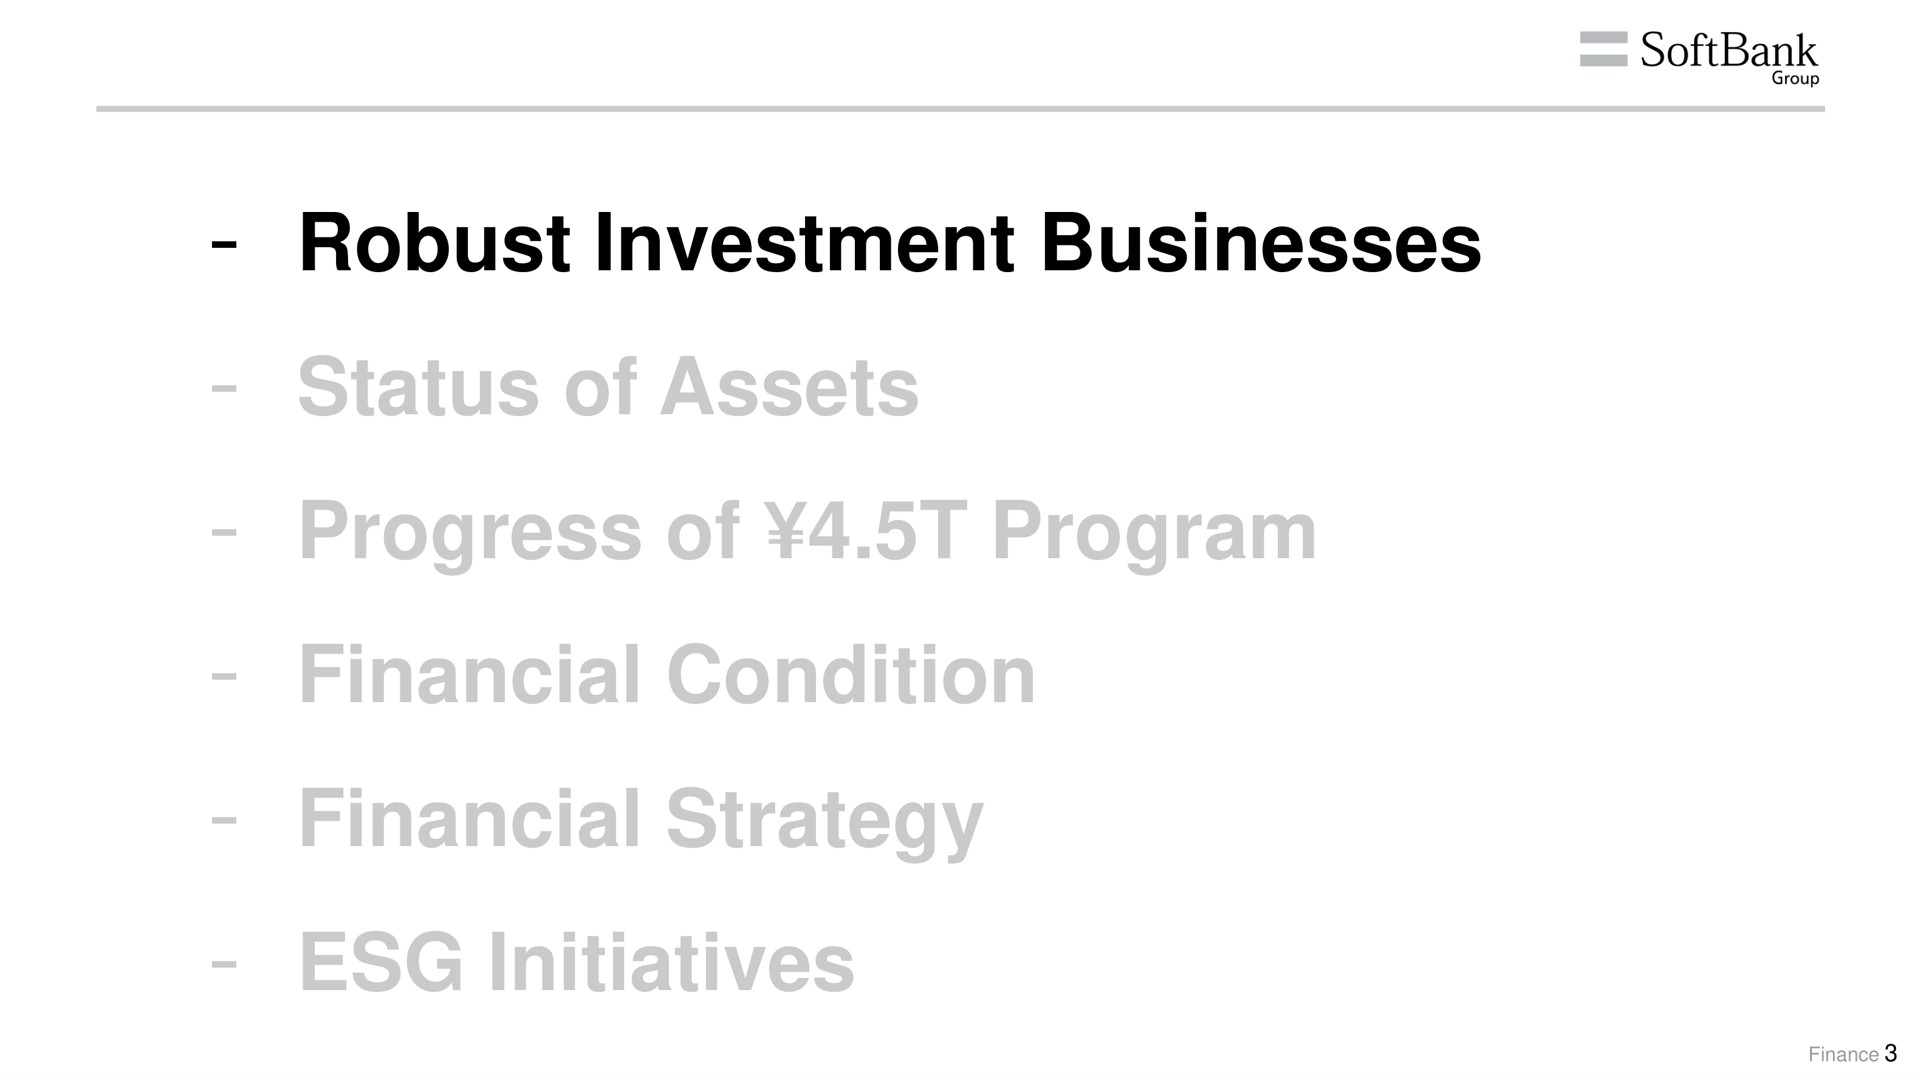 robust investment businesses status of assets progress of program financial condition financial strategy initiatives | SoftBank